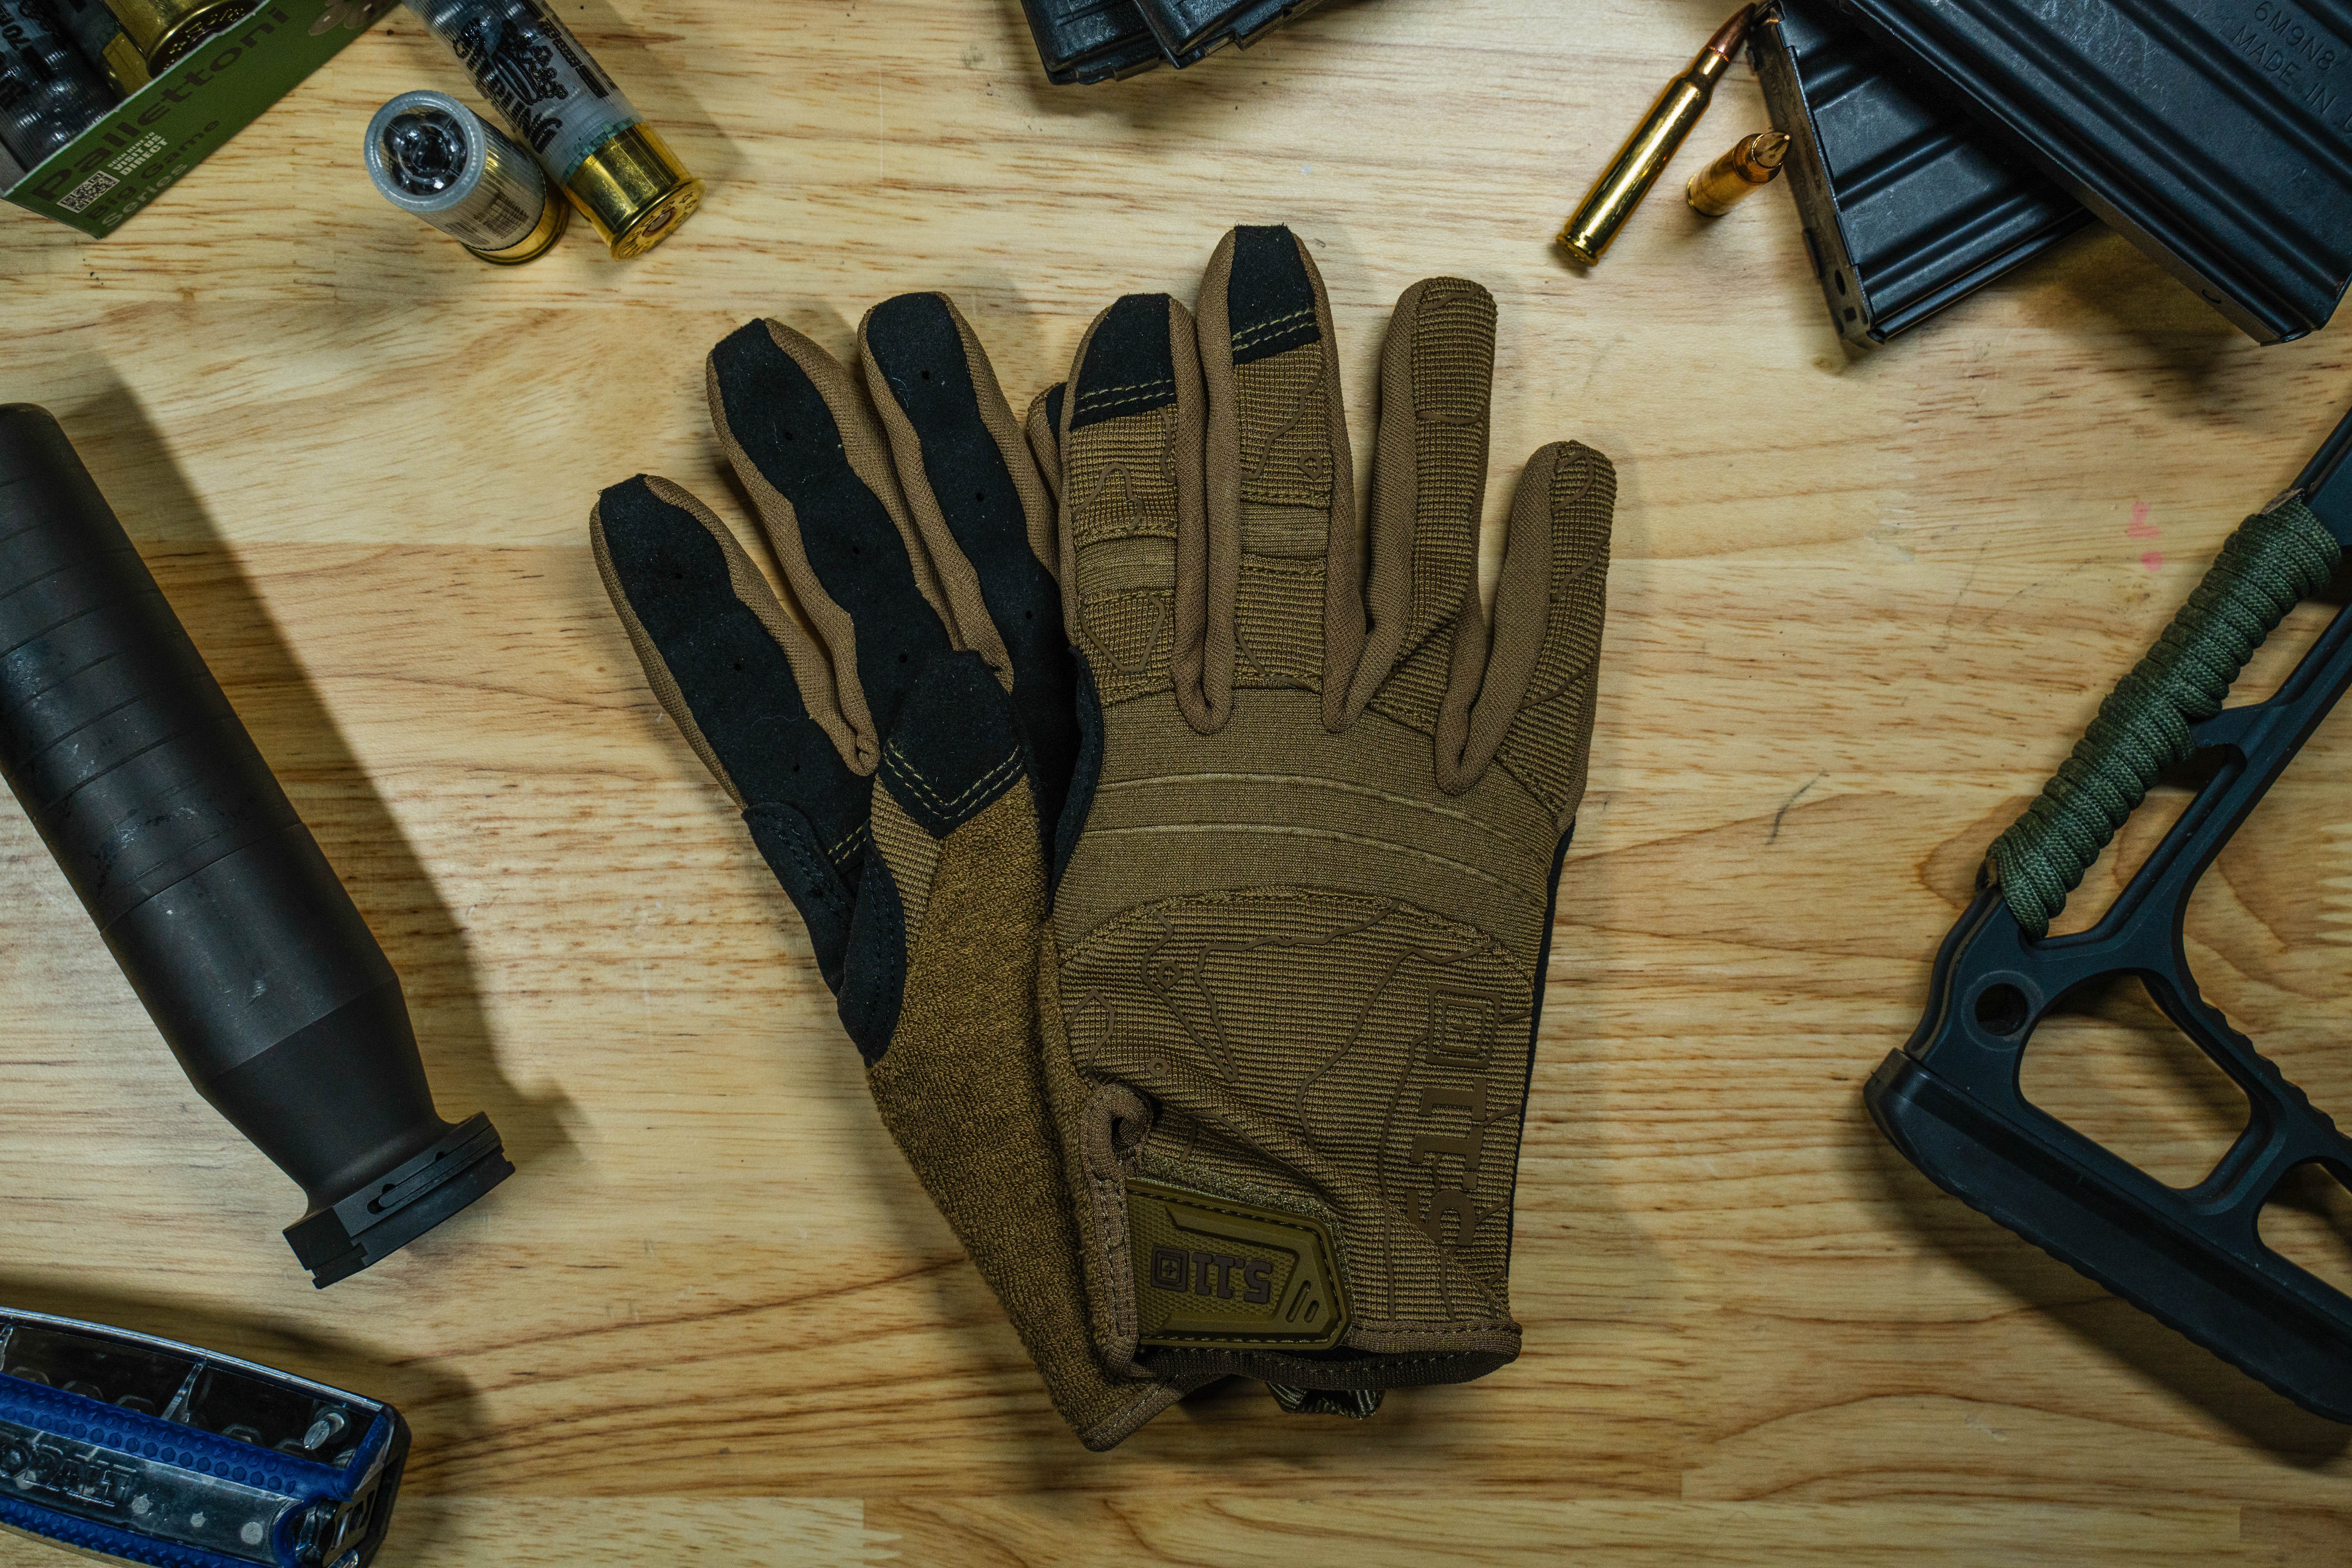 2 Pair of Mechanix Wear Tactical Specialty Grip Work Gloves Size X